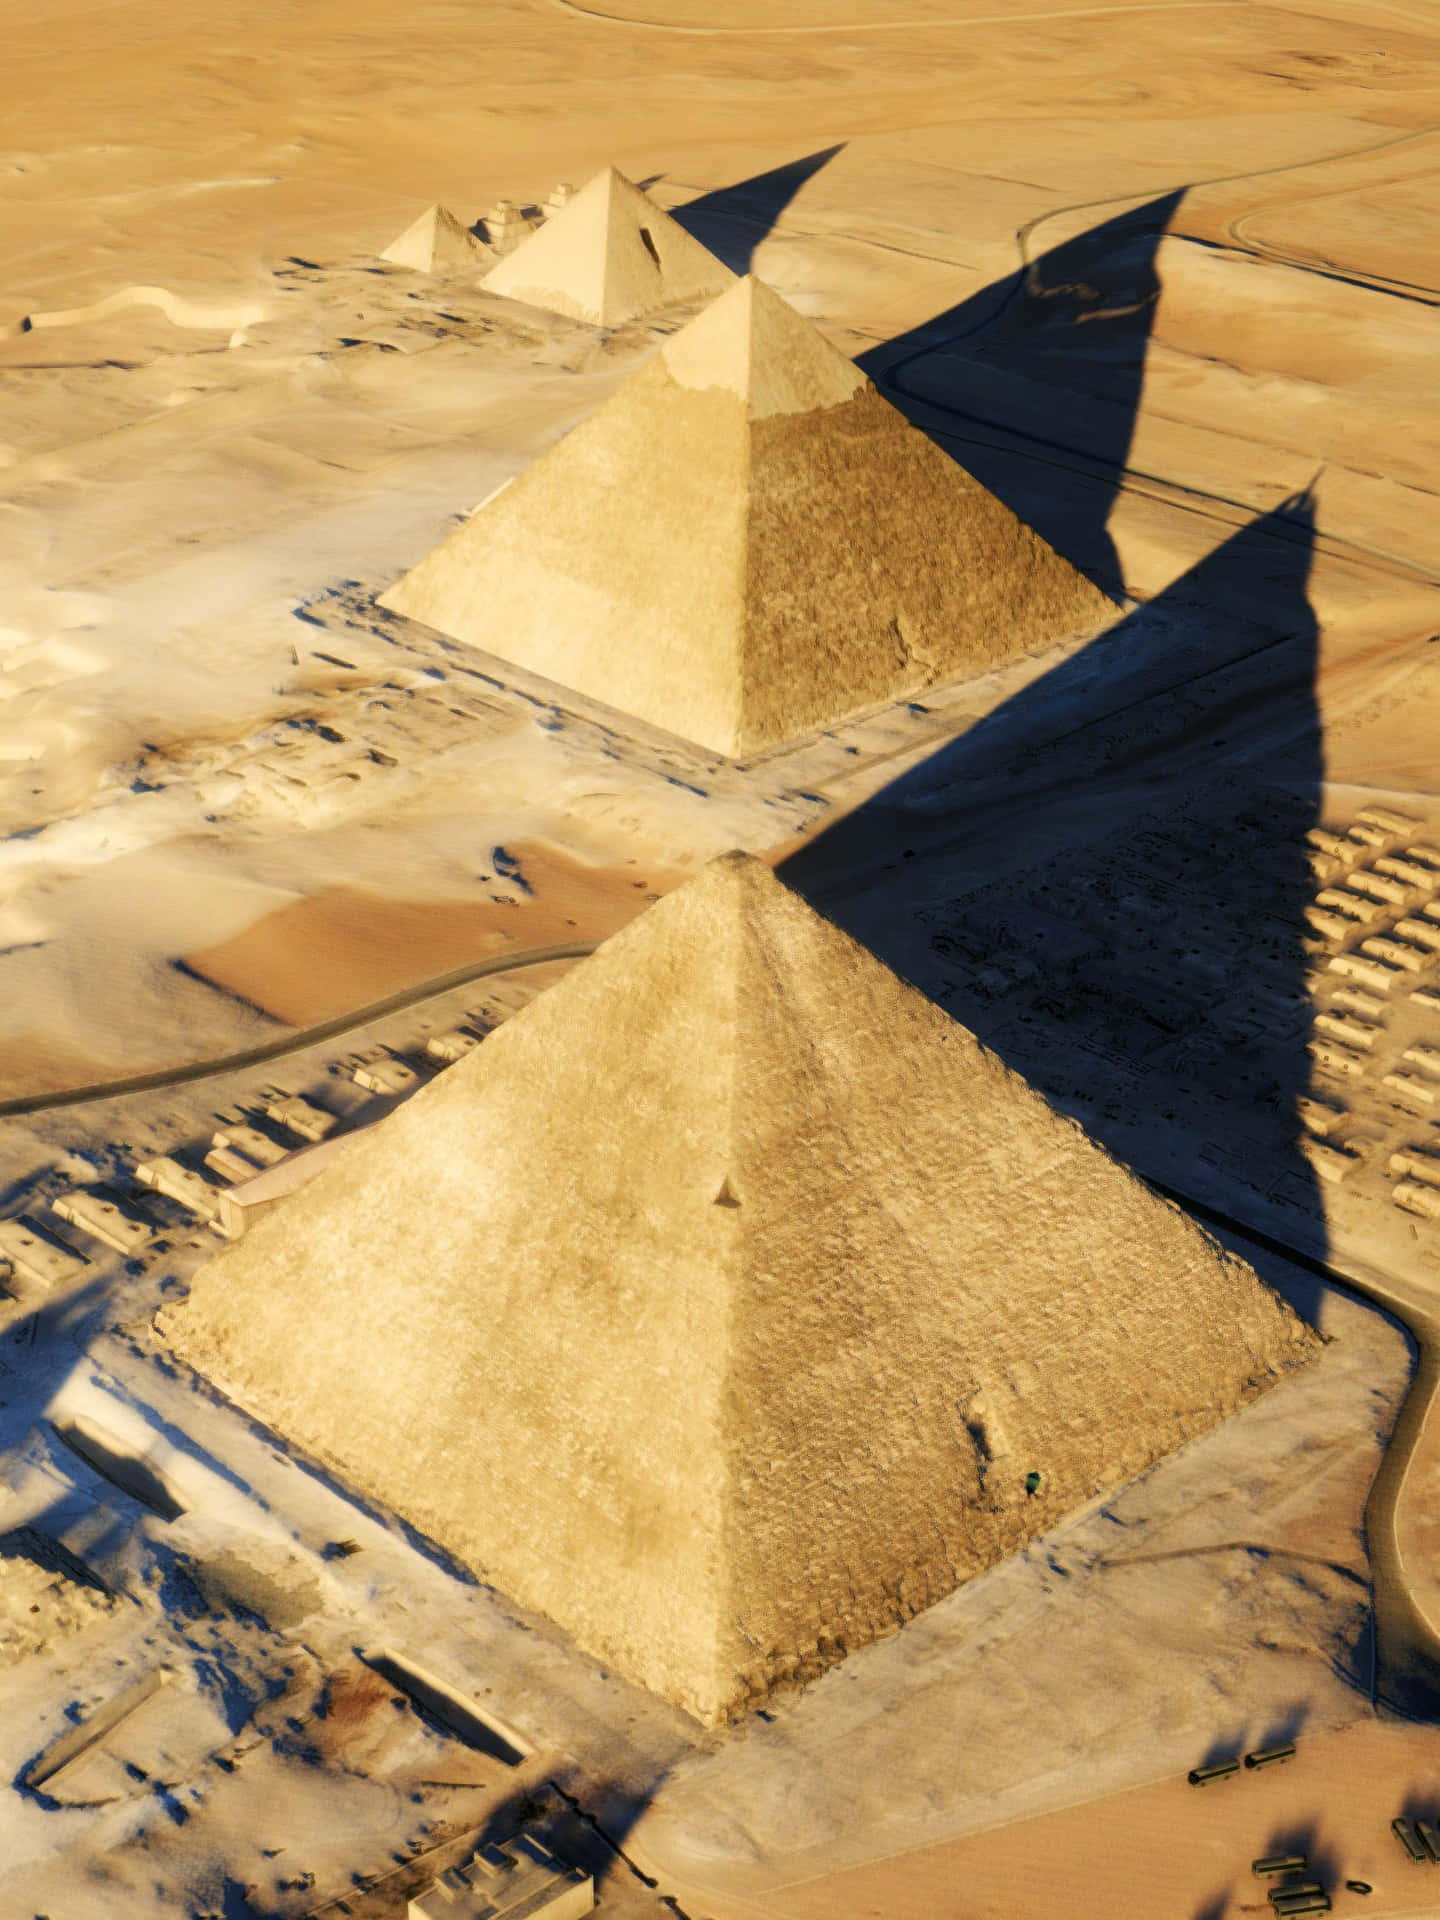 The Pyramids Of Giza Casting Shadow Wallpaper